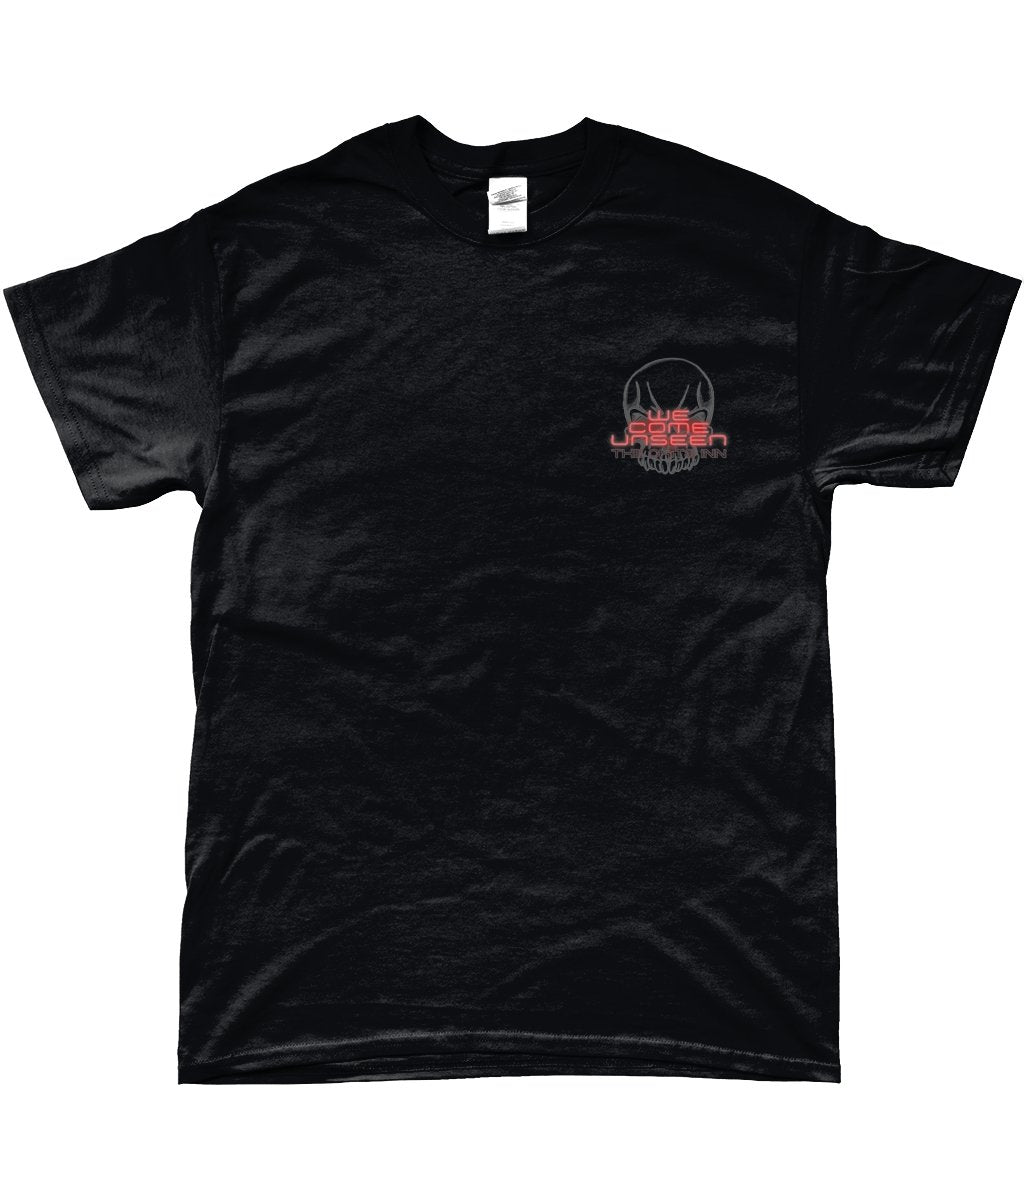 We Come Unseen Submariner Skull Tee - The Chits Inn